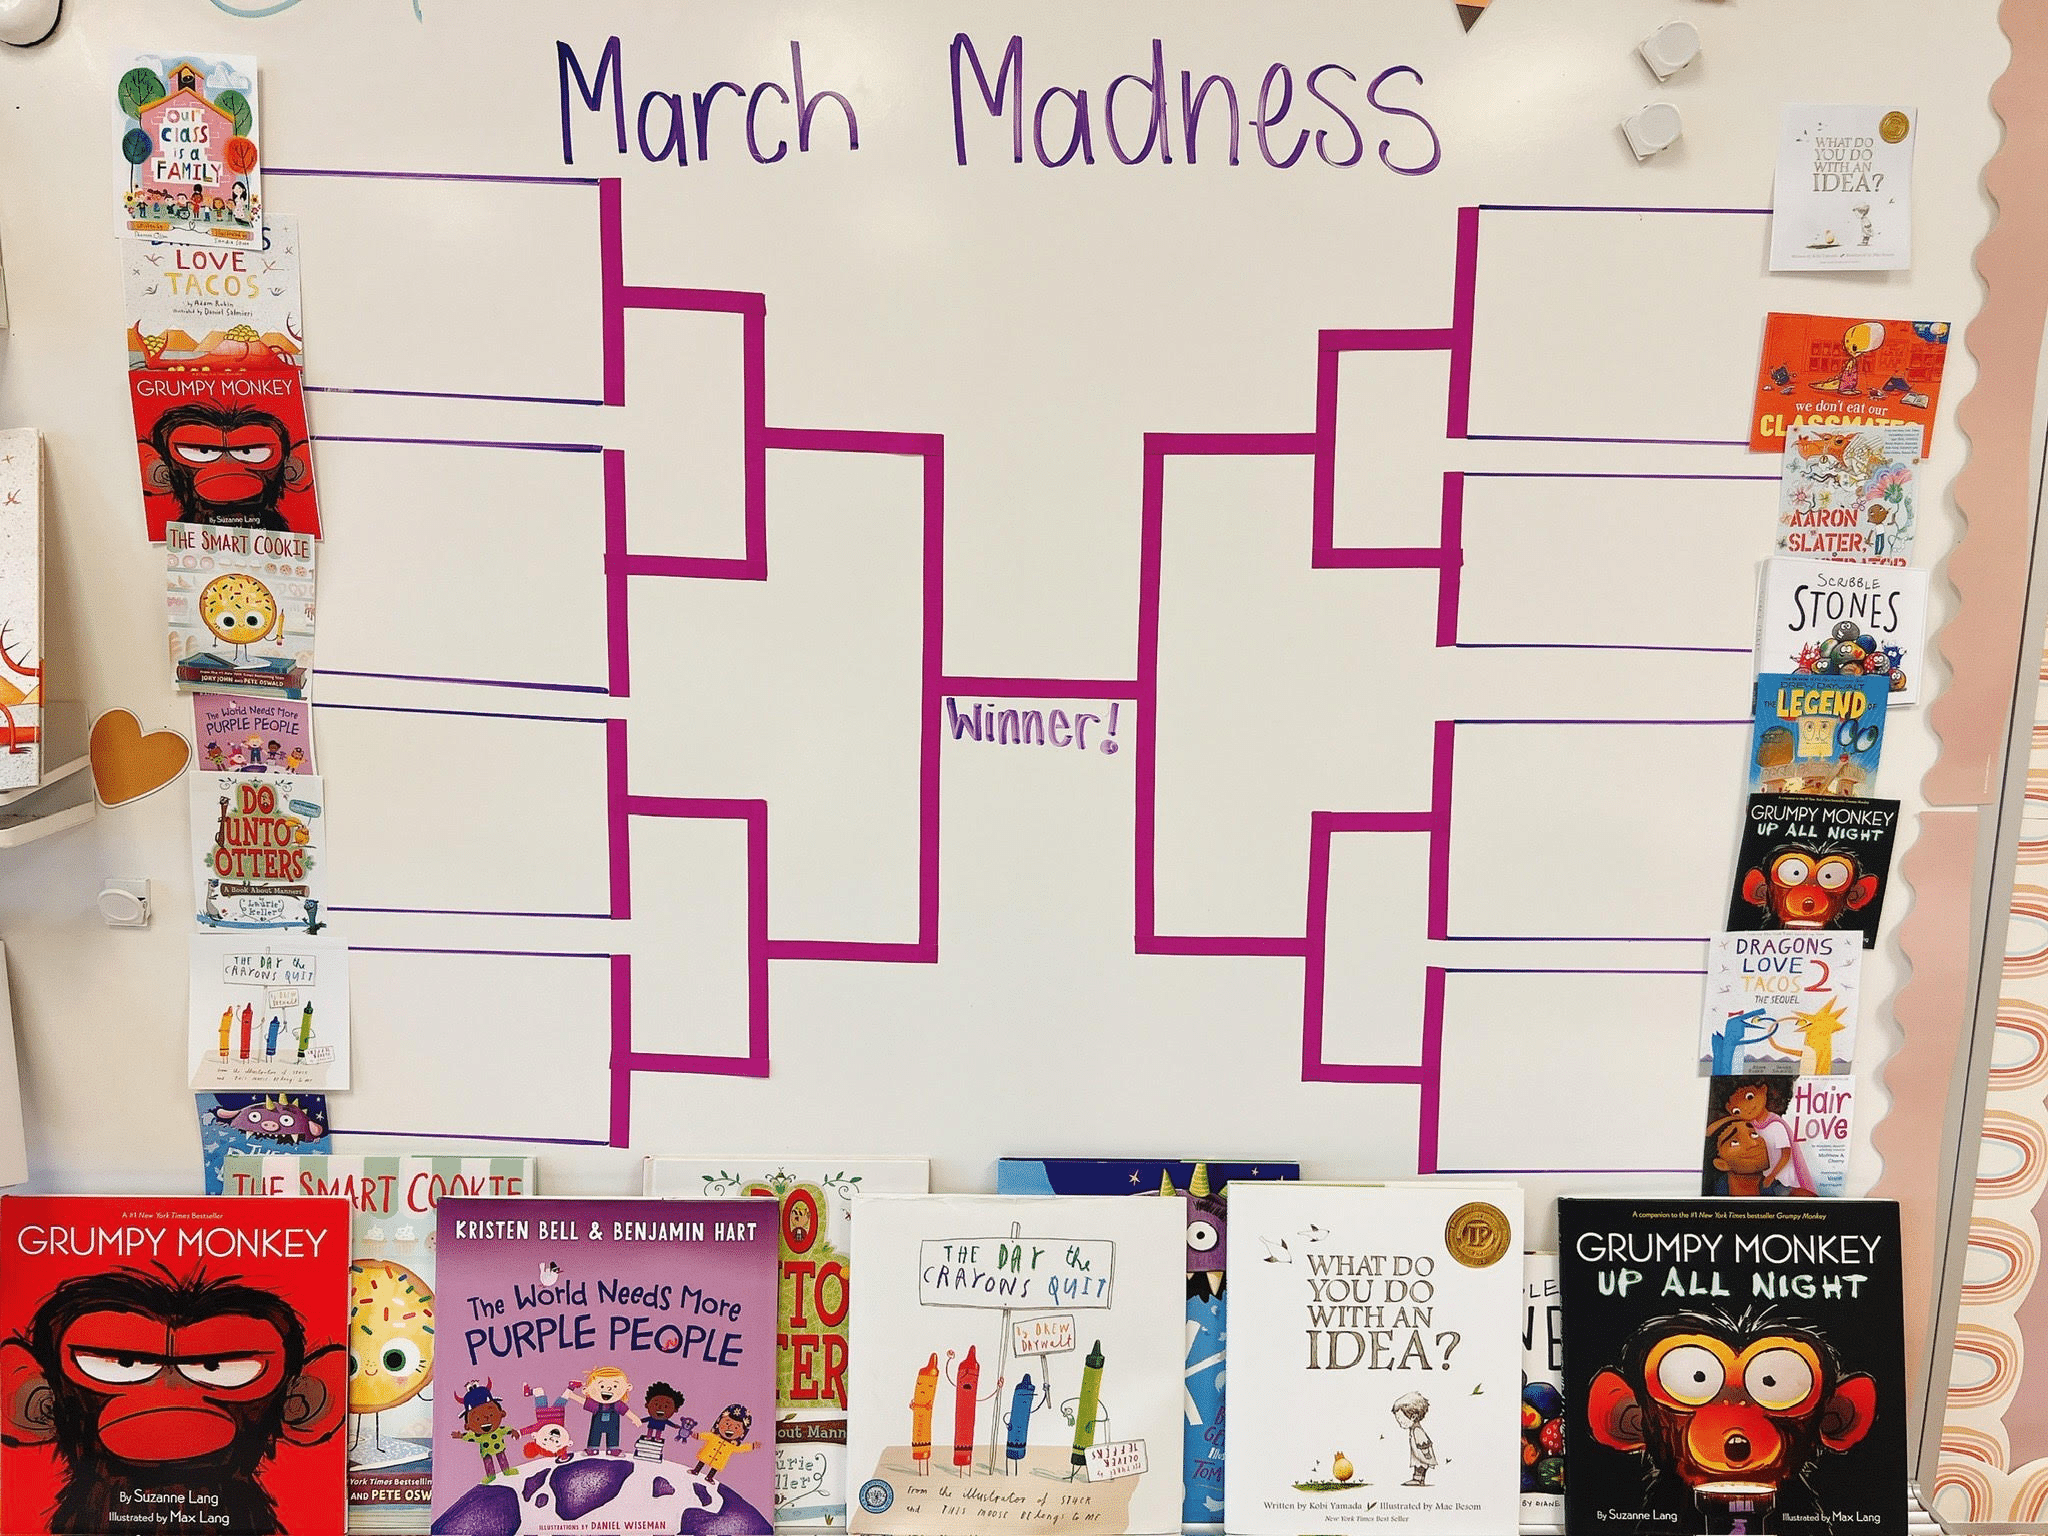 March Madness has arrived at Protsman! Ms. Mikrut’s class is doing a March Madness Book Tournament! They are reading a book a day and then vote on which book the class likes the best! They are down to the Elite 8!